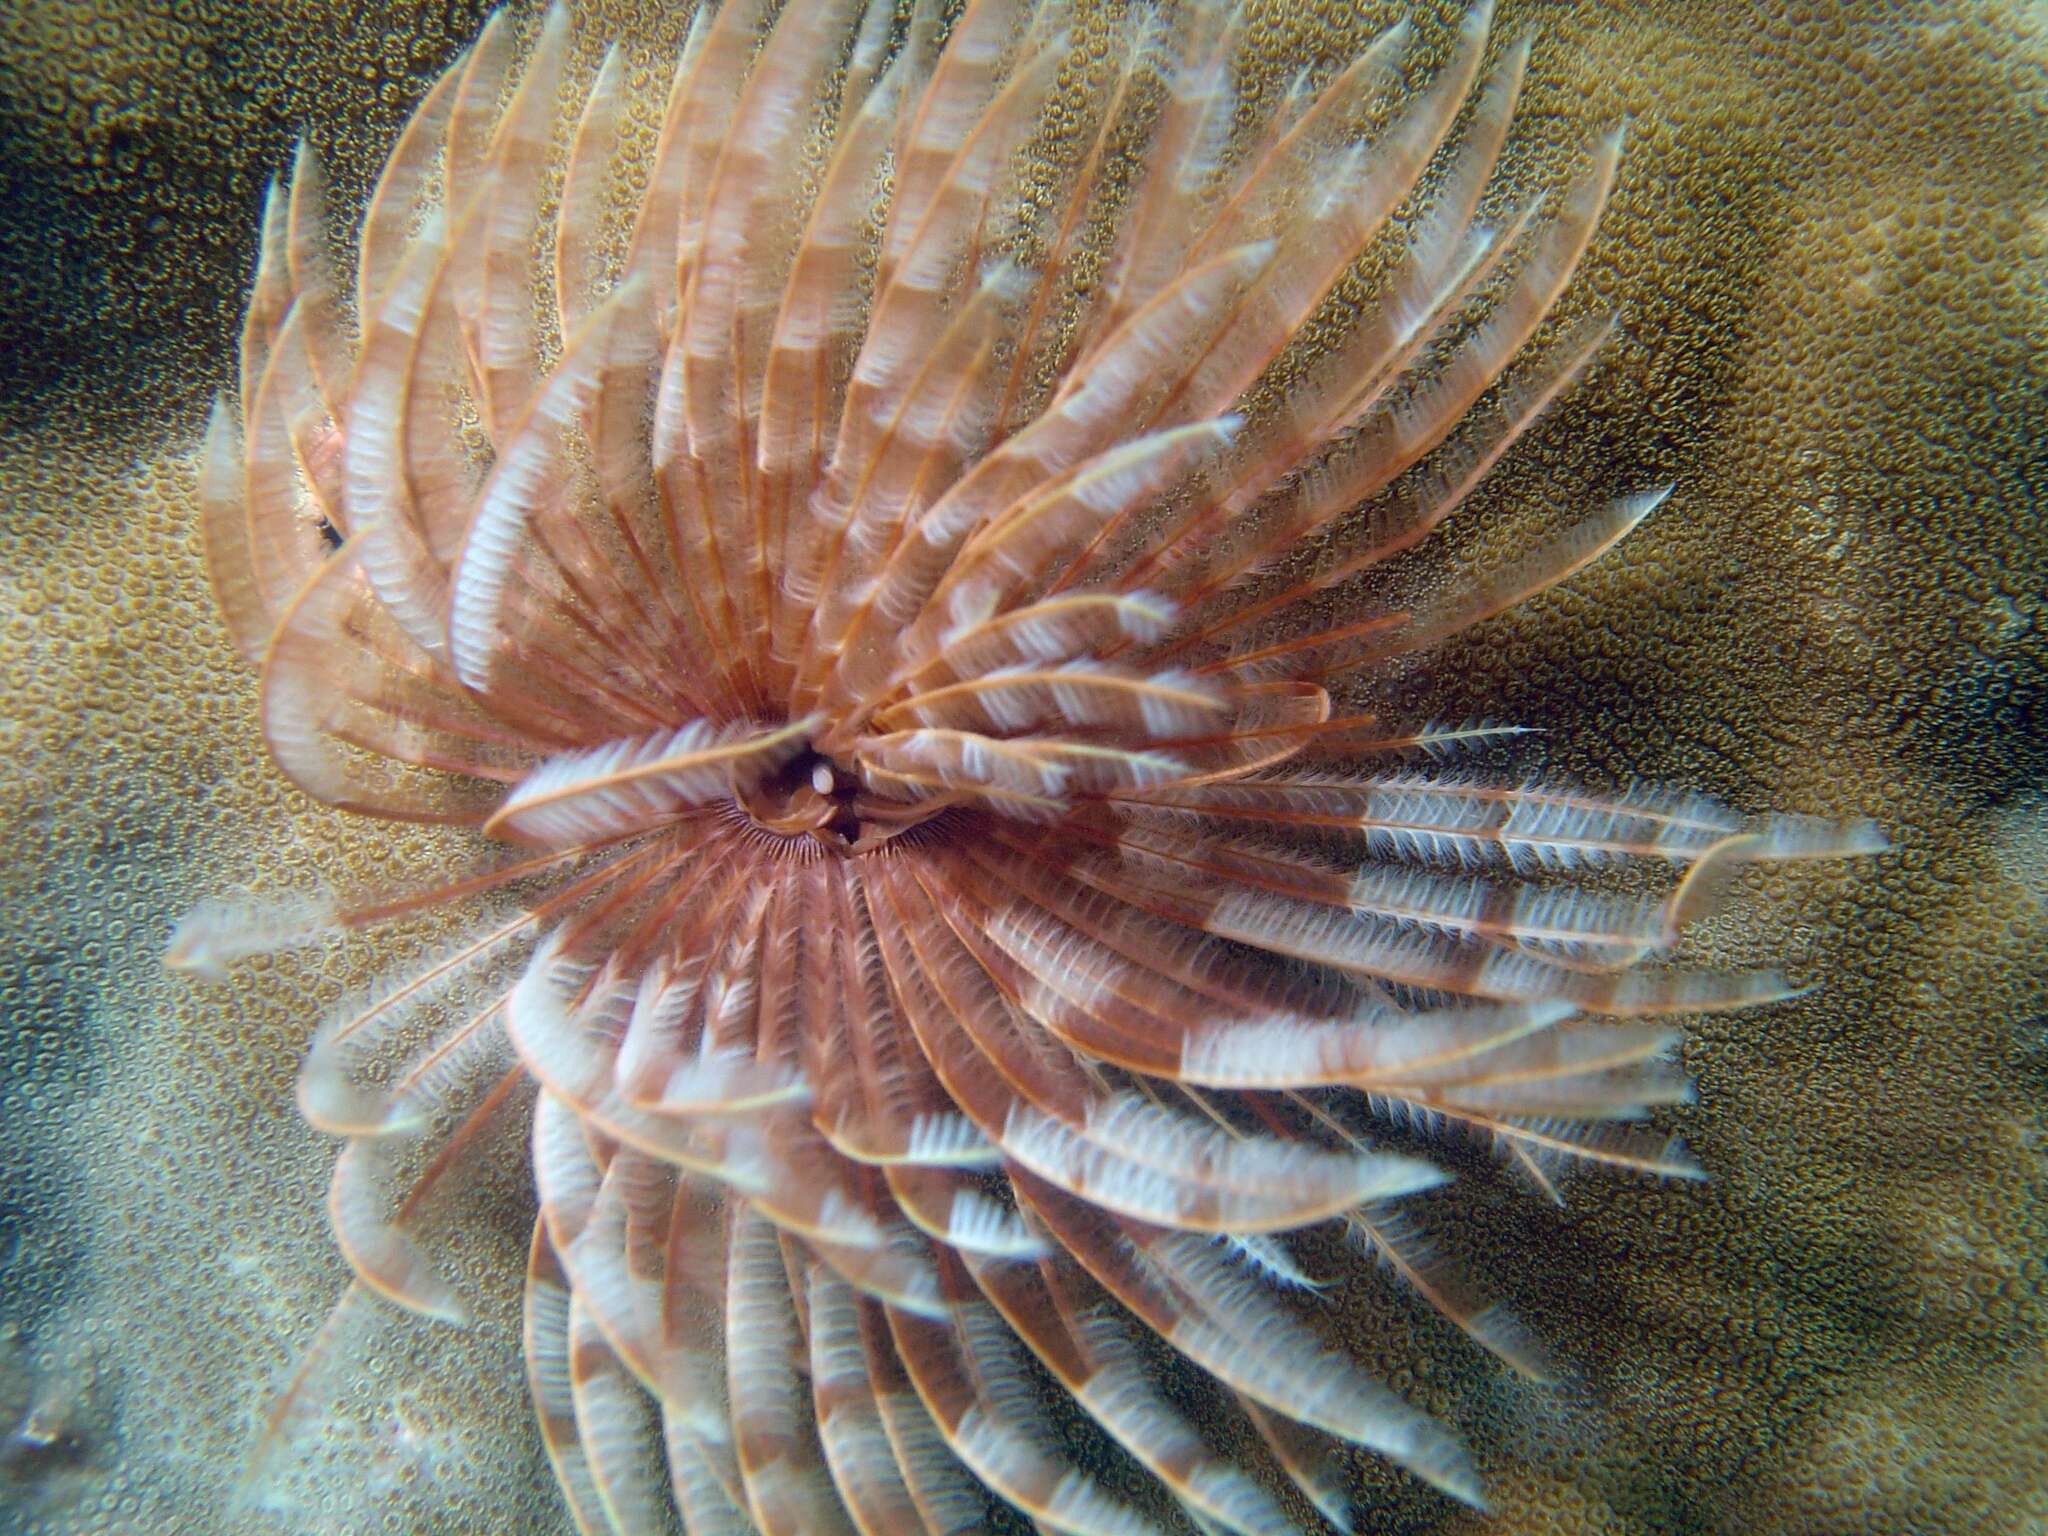 Image of Feather Duster Worms